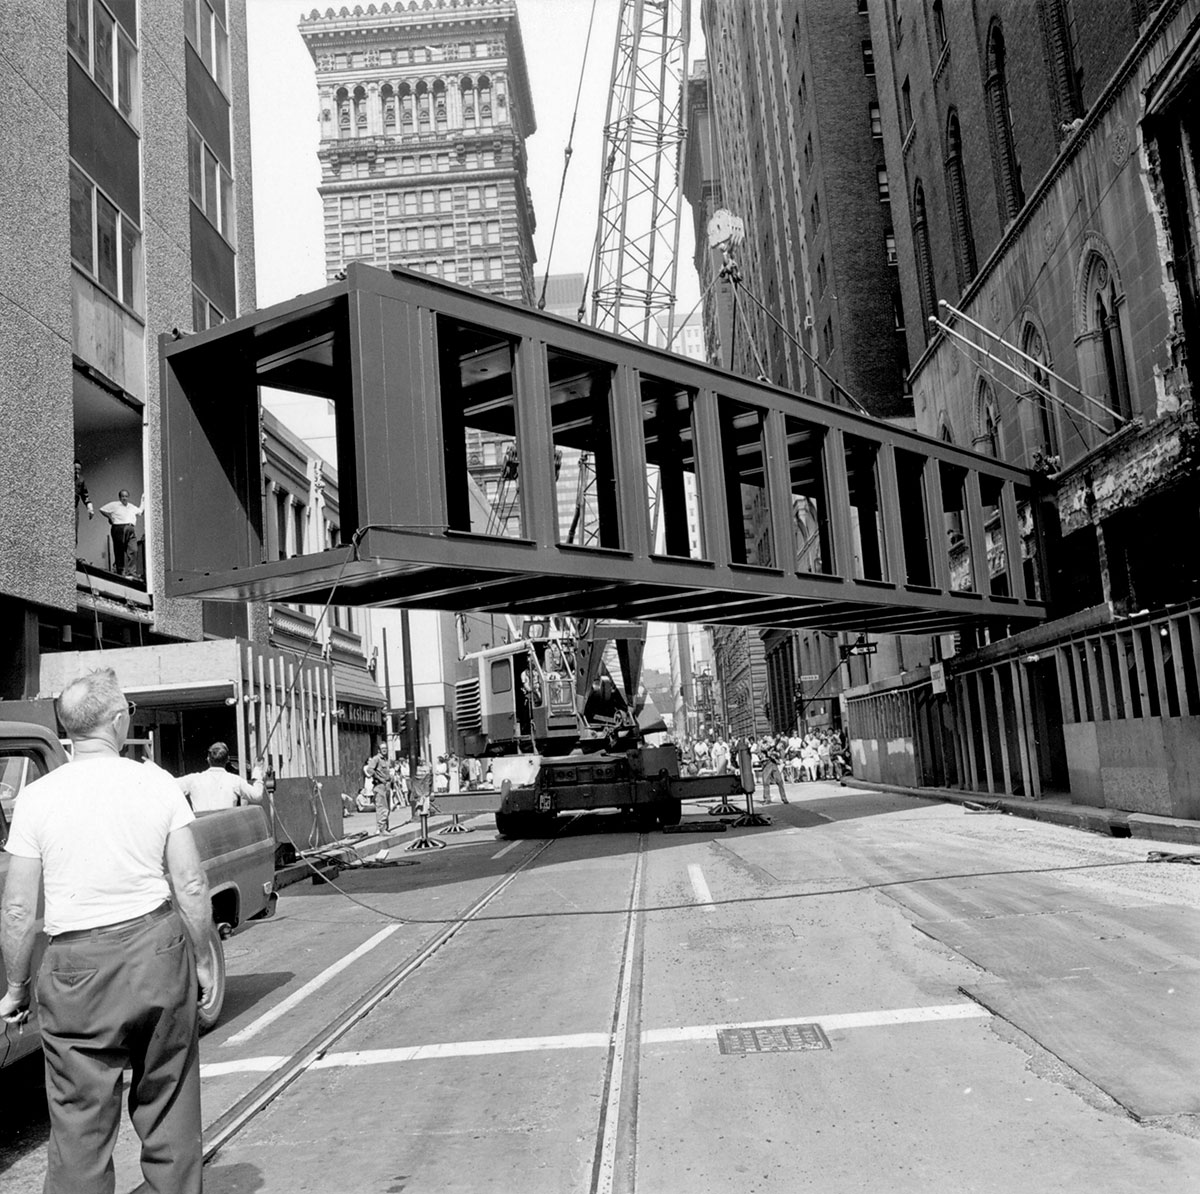 Construction of a skybridge between two buildings